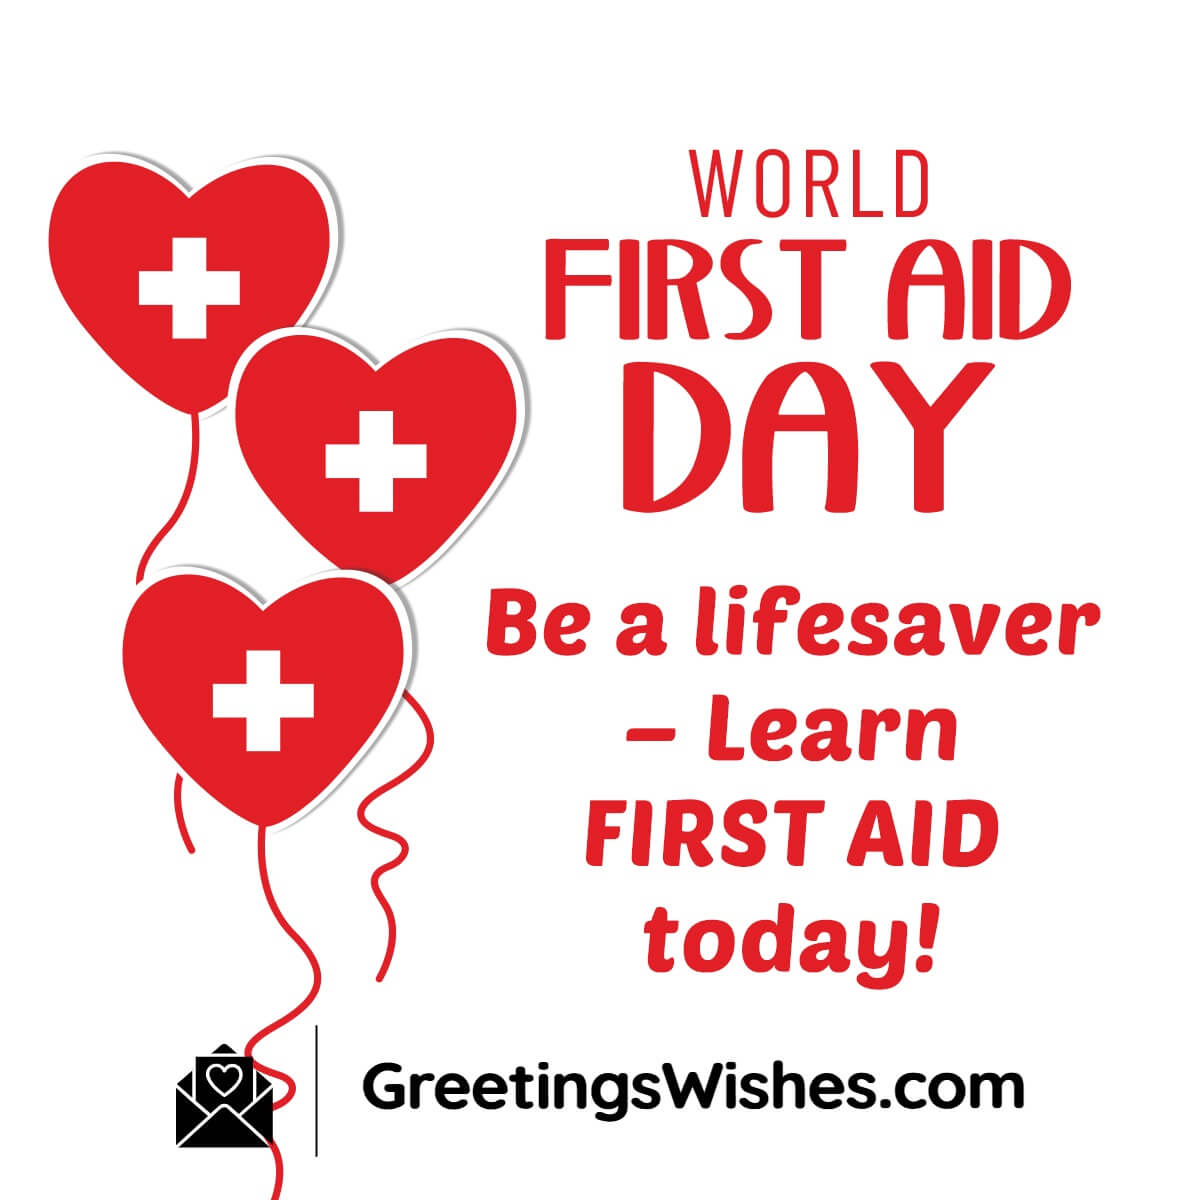 world-first-aid-day-quotes-wishes-9th-september-greetings-wishes